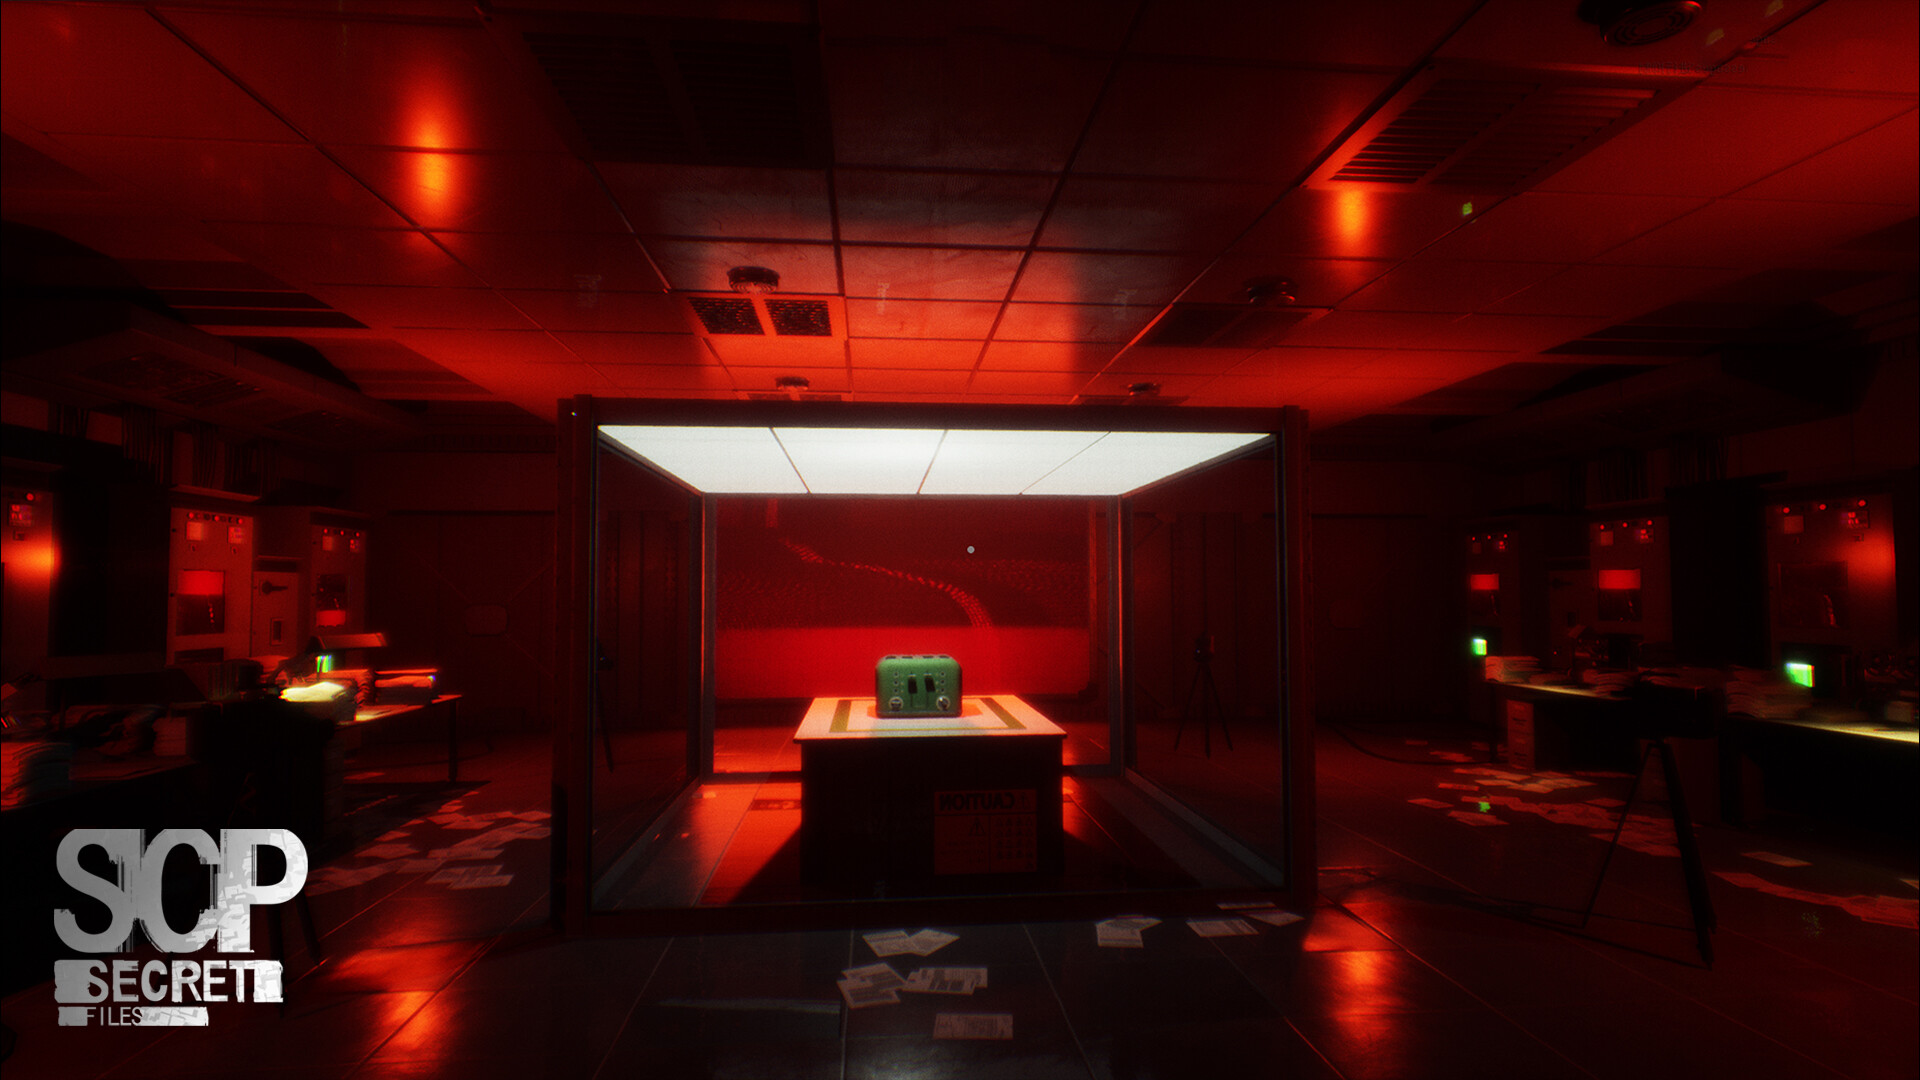 SCP: Secret Files' Review - Anthology Game Nails the Spirit of the